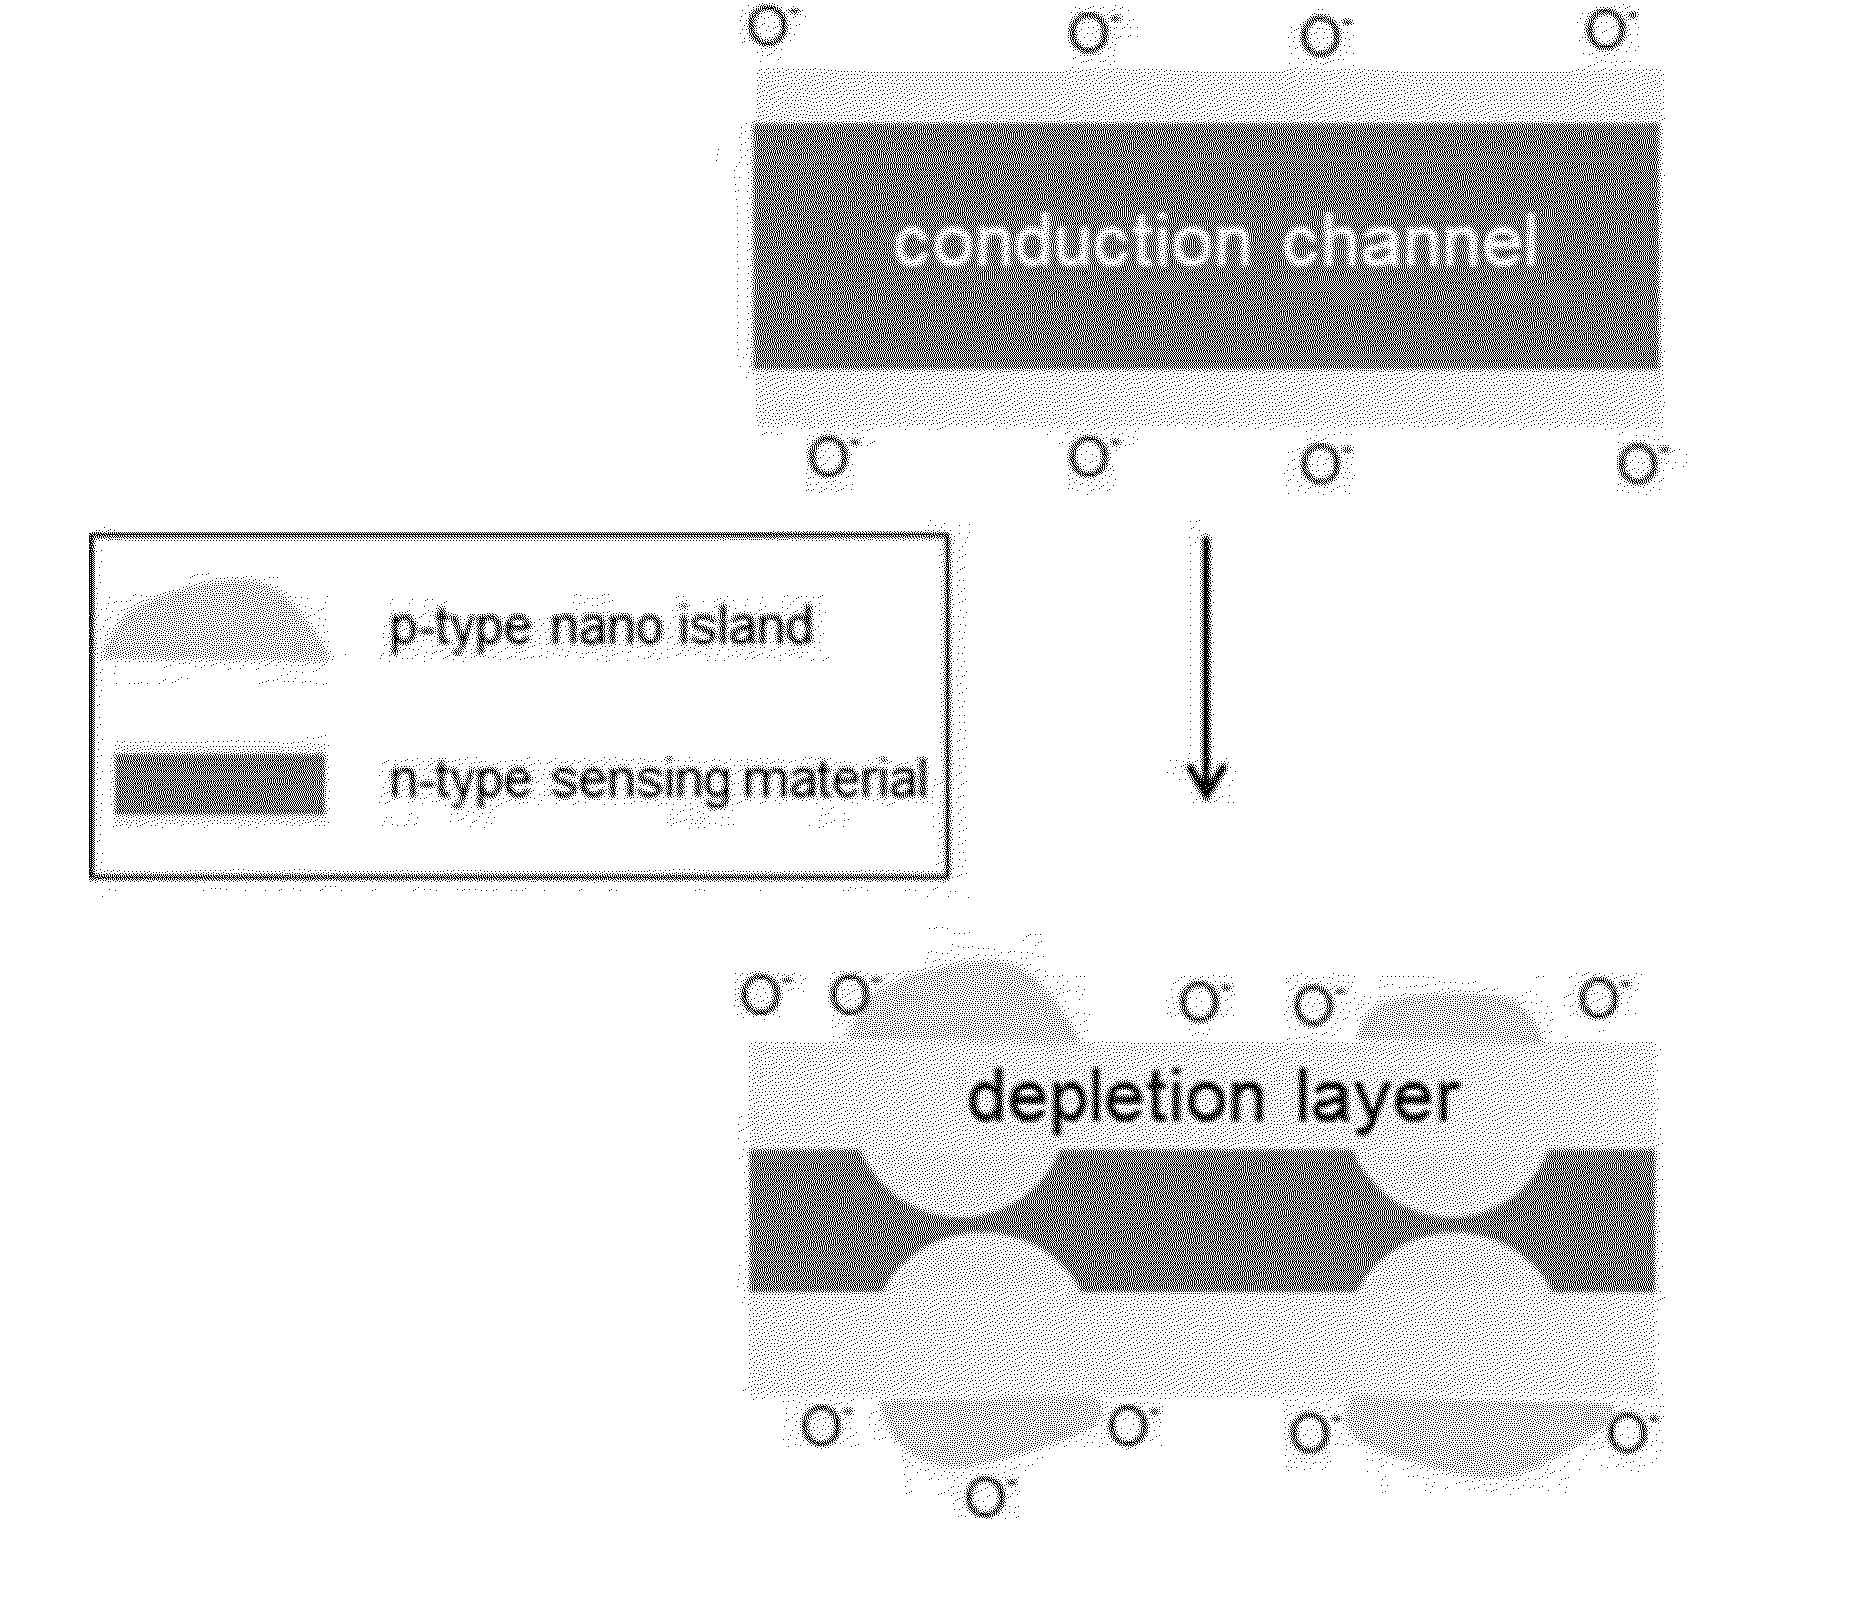 Sensor including core-shell nanostructure, and method for producing same